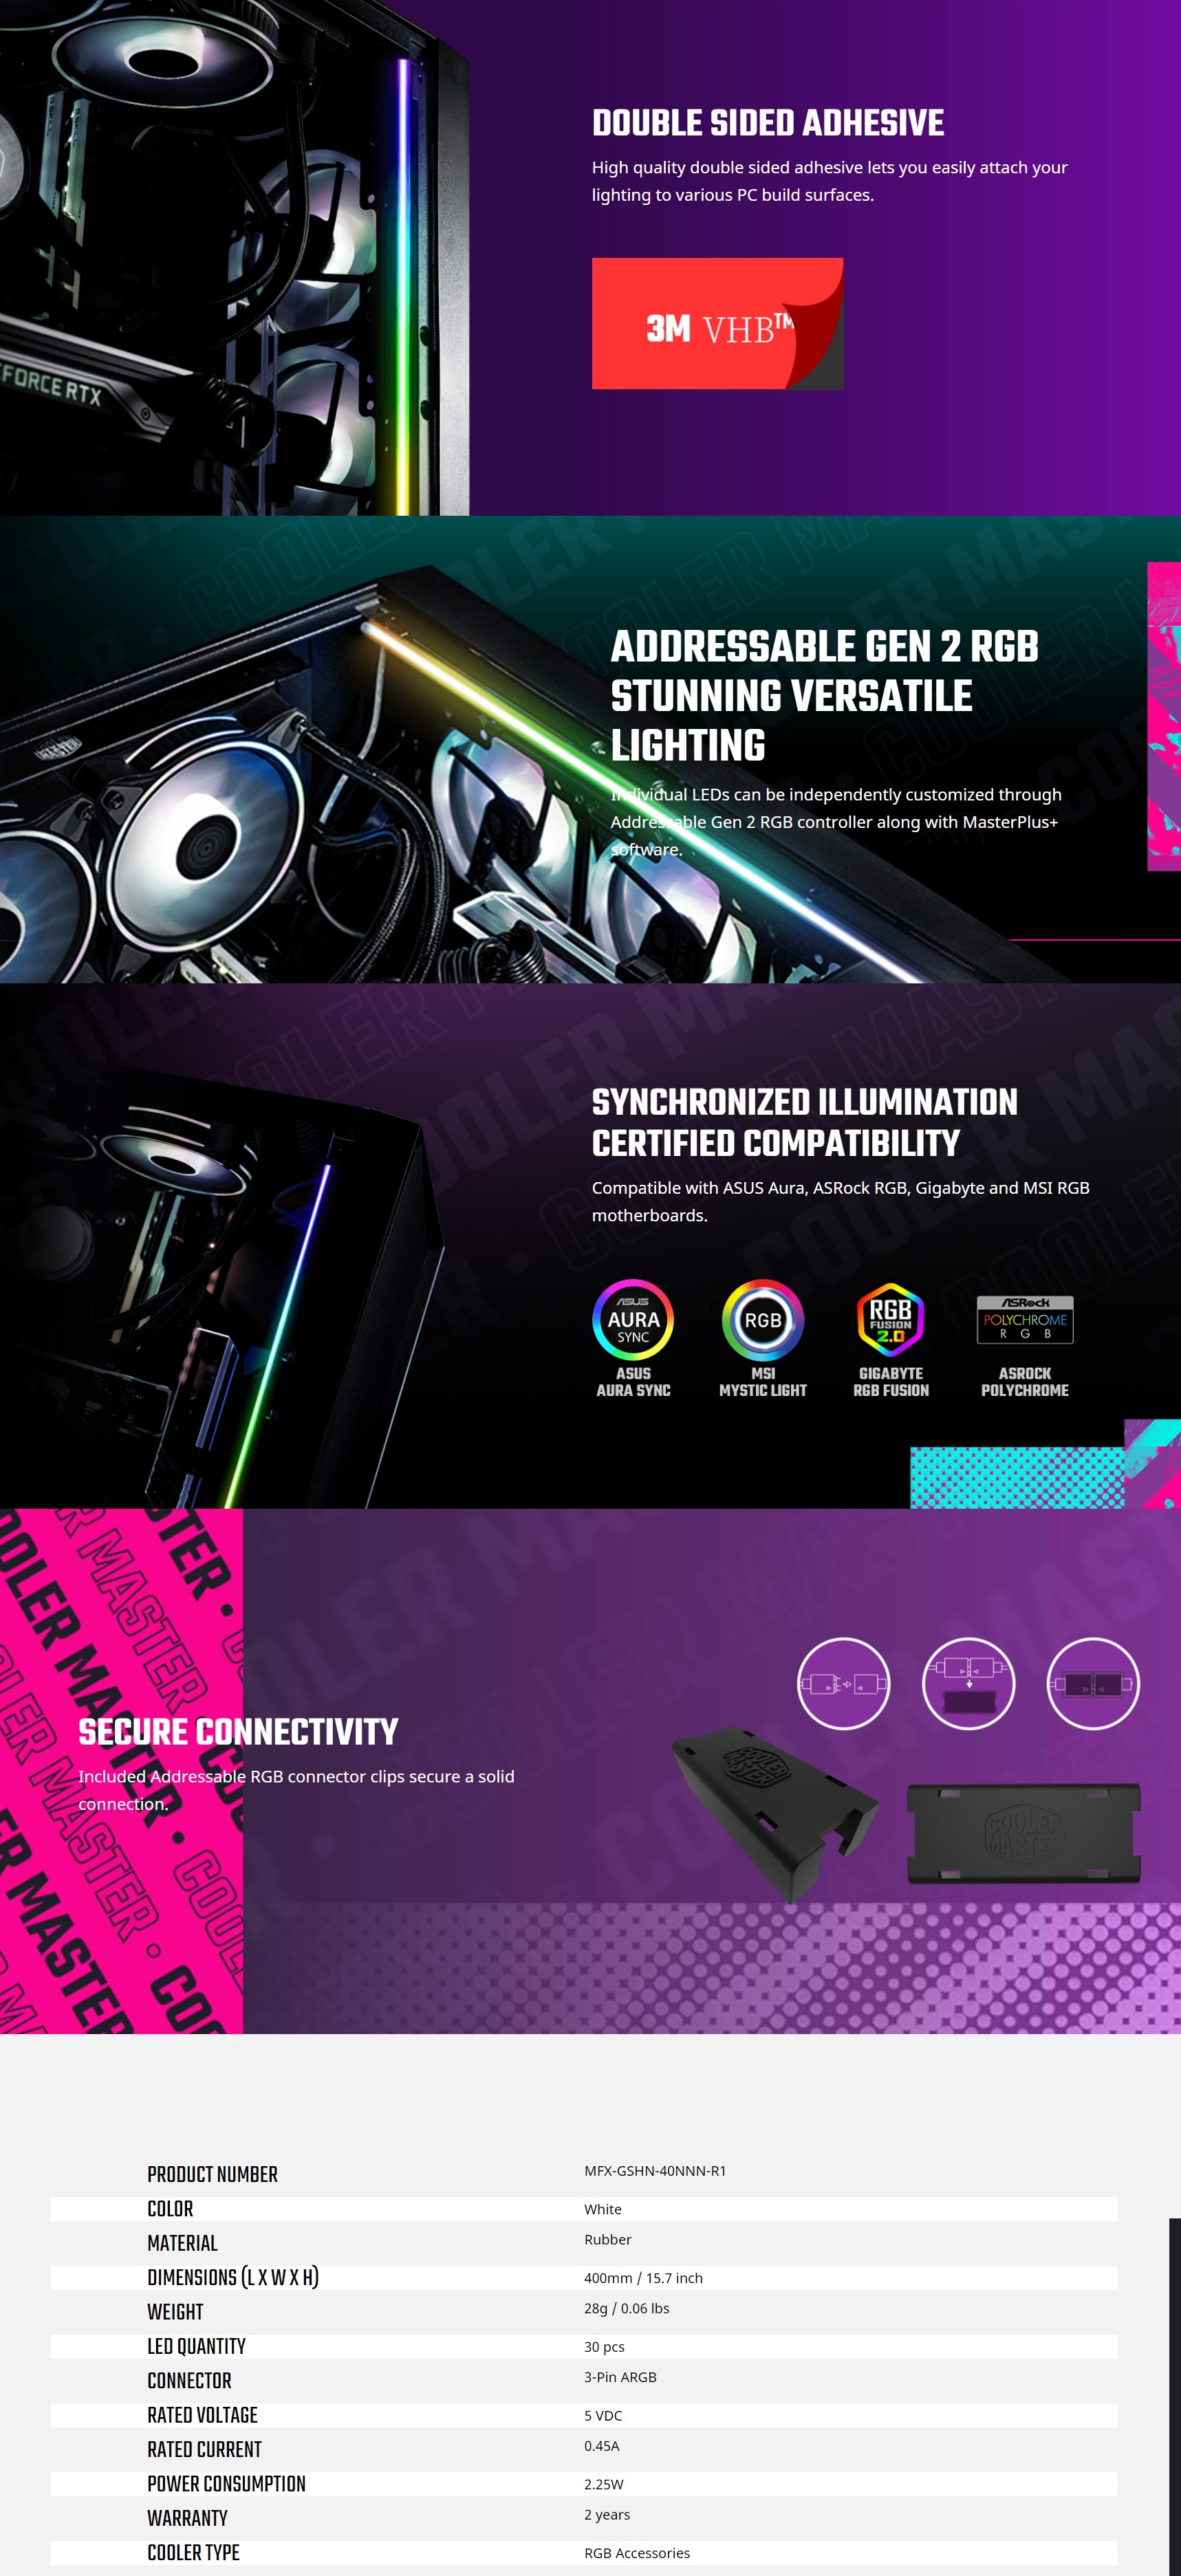 A large marketing image providing additional information about the product Cooler Master Addressable RGB LED Strip - Additional alt info not provided